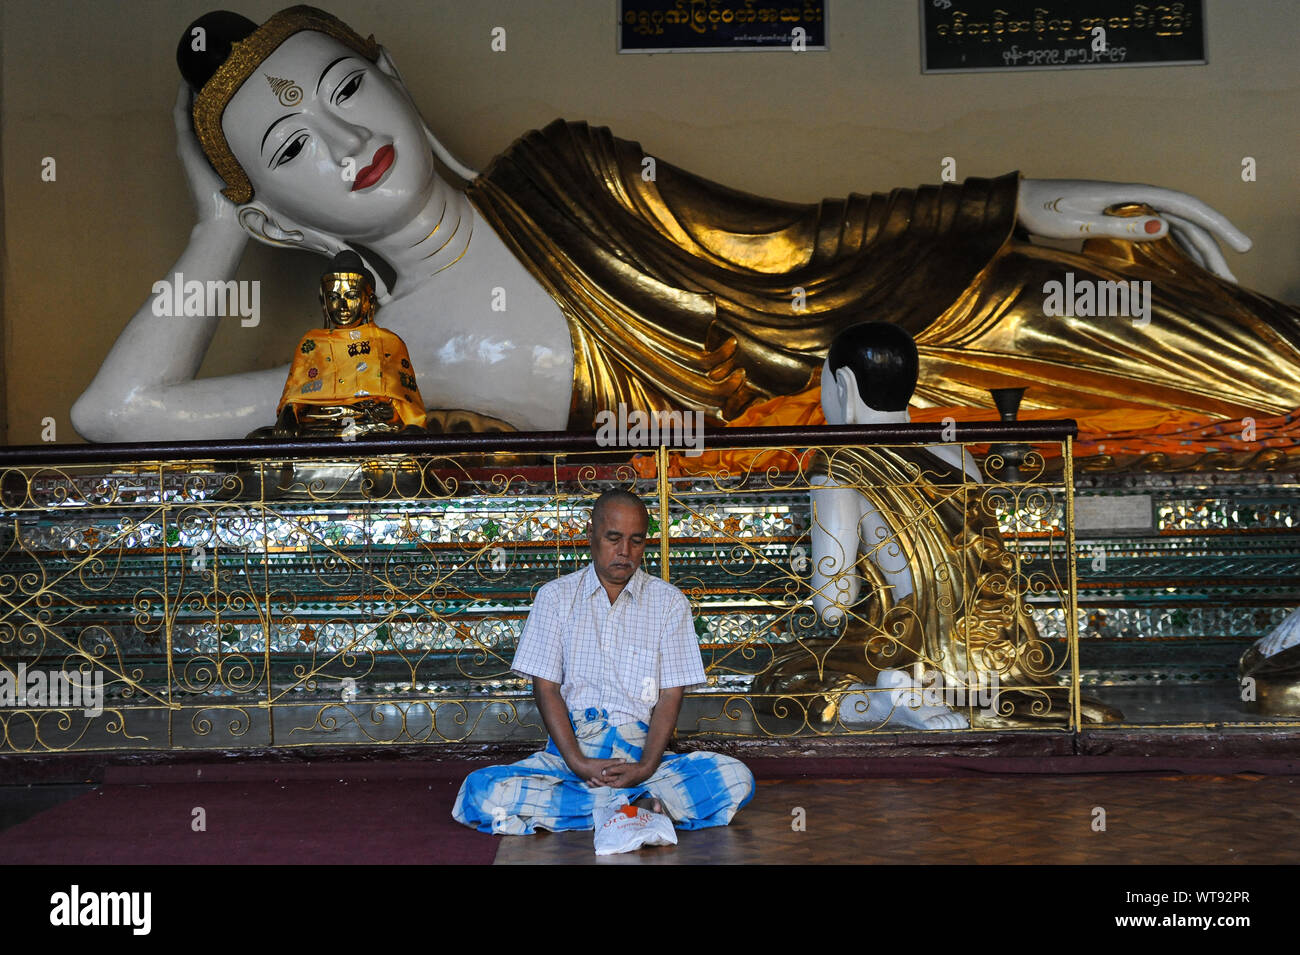 21.01.2014, Yangon, Myanmar, Asia - A man meditates in front of a Buddha statue in the temple compound of the Shwedagon Pagoda. Stock Photo